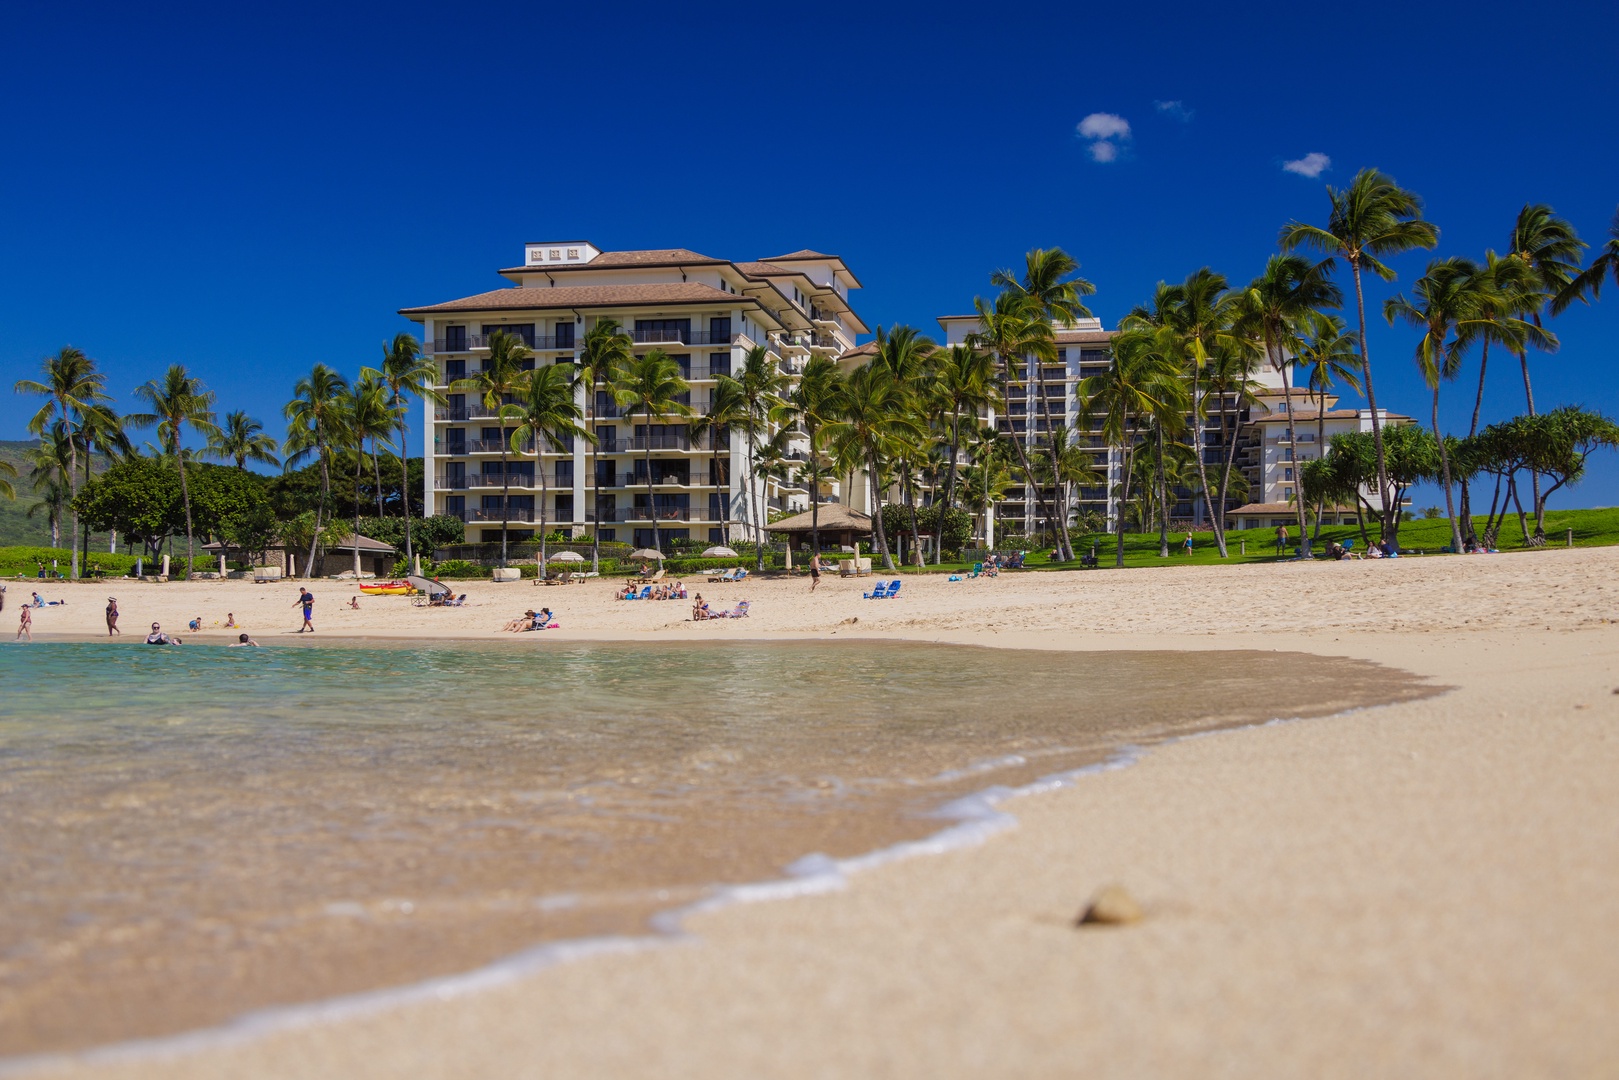 Kapolei Vacation Rentals, Ko Olina Kai Estate #17 - The private lagoon at Ko Olina is the perfect place for a relaxing afternoon in the sun.